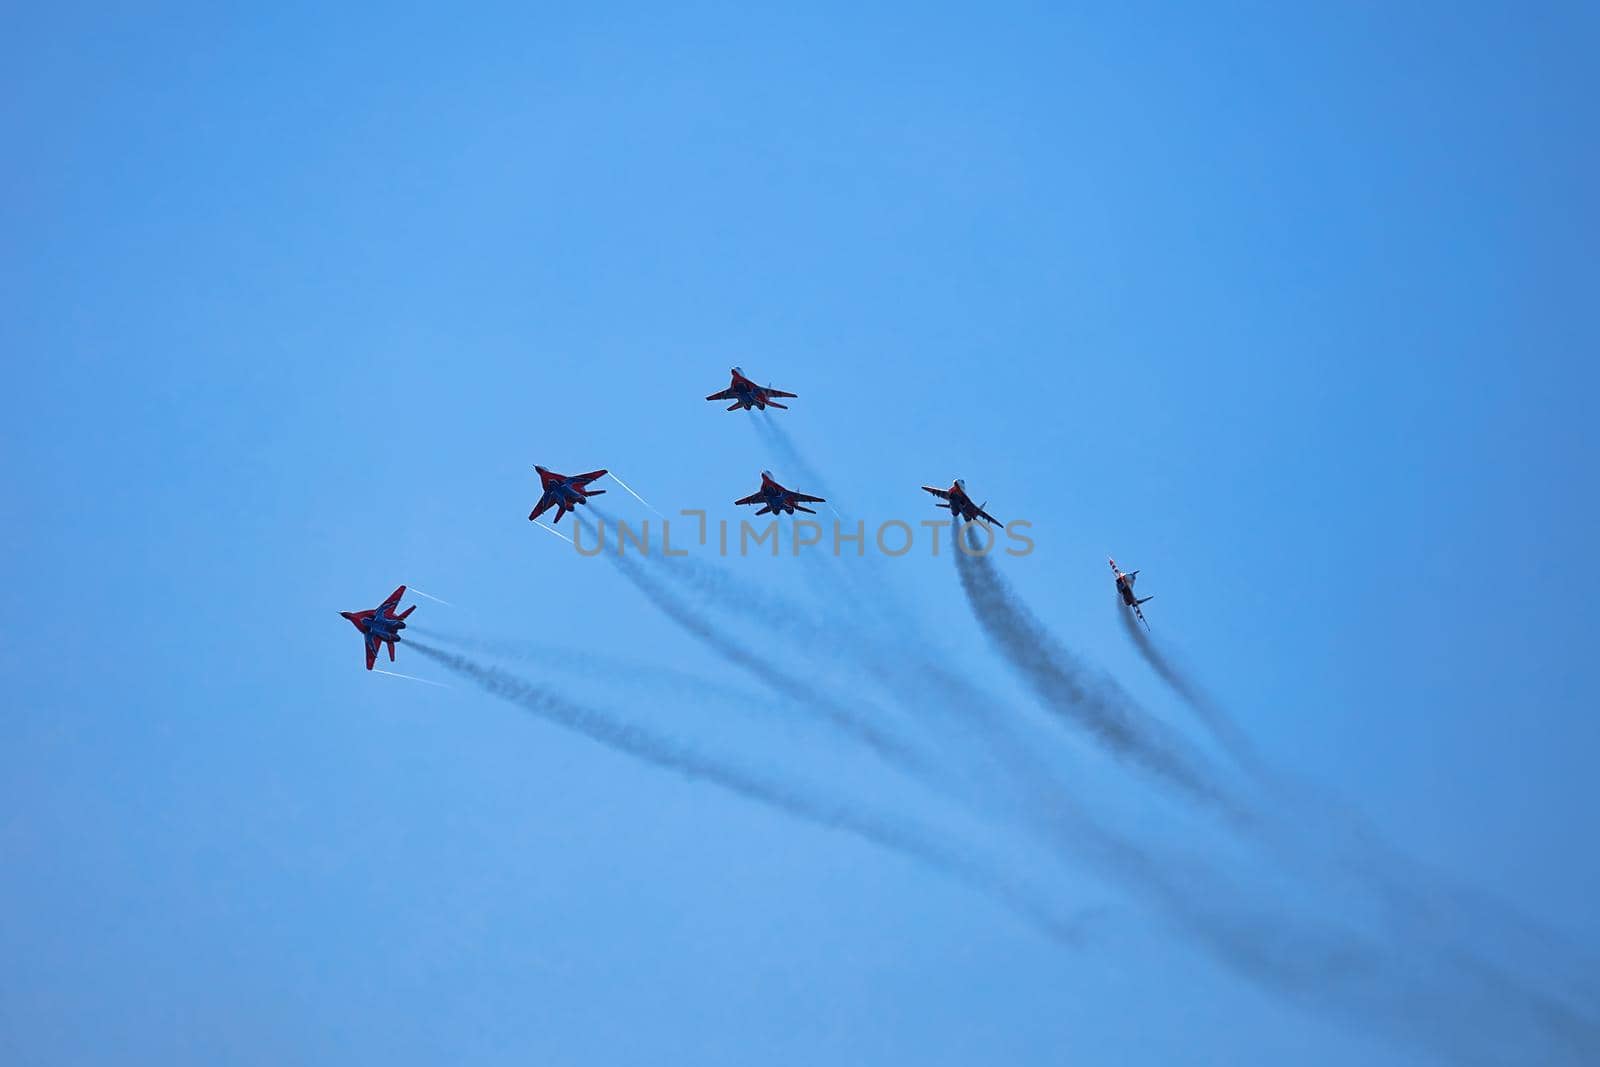 Airshow of the aerobatic team Strizhi - The Swifts. Aerobatic Team on fighters Mig-29, Russian Air Force, on at the International Aviation and Space salon MAKS 2019. ZHUKOVSKY, RUSSIA, 08,27,2019 by EvgeniyQW